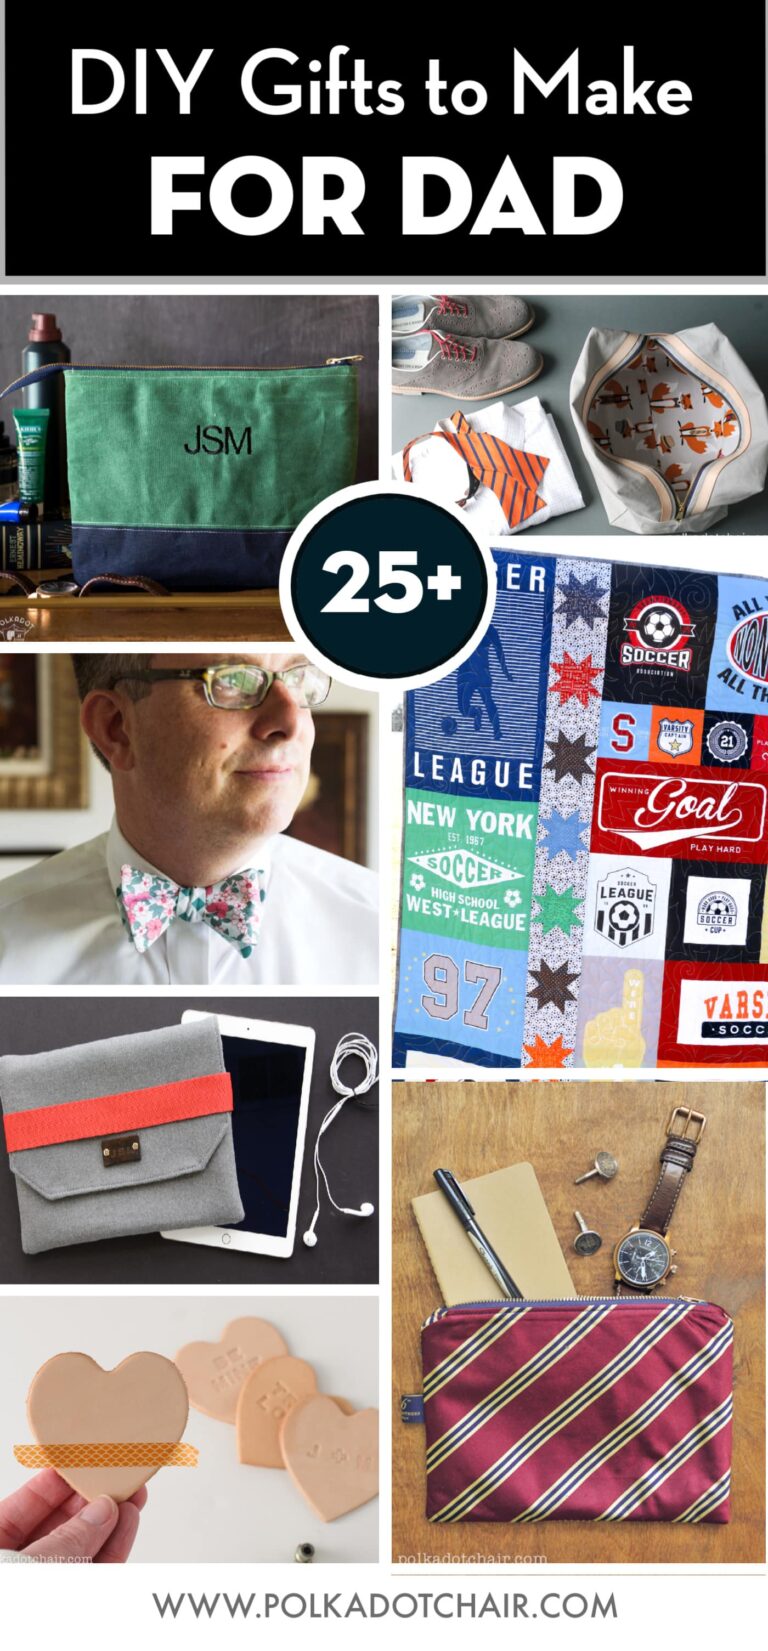 25+ DIY Father’s Day Gifts perfect for Dad